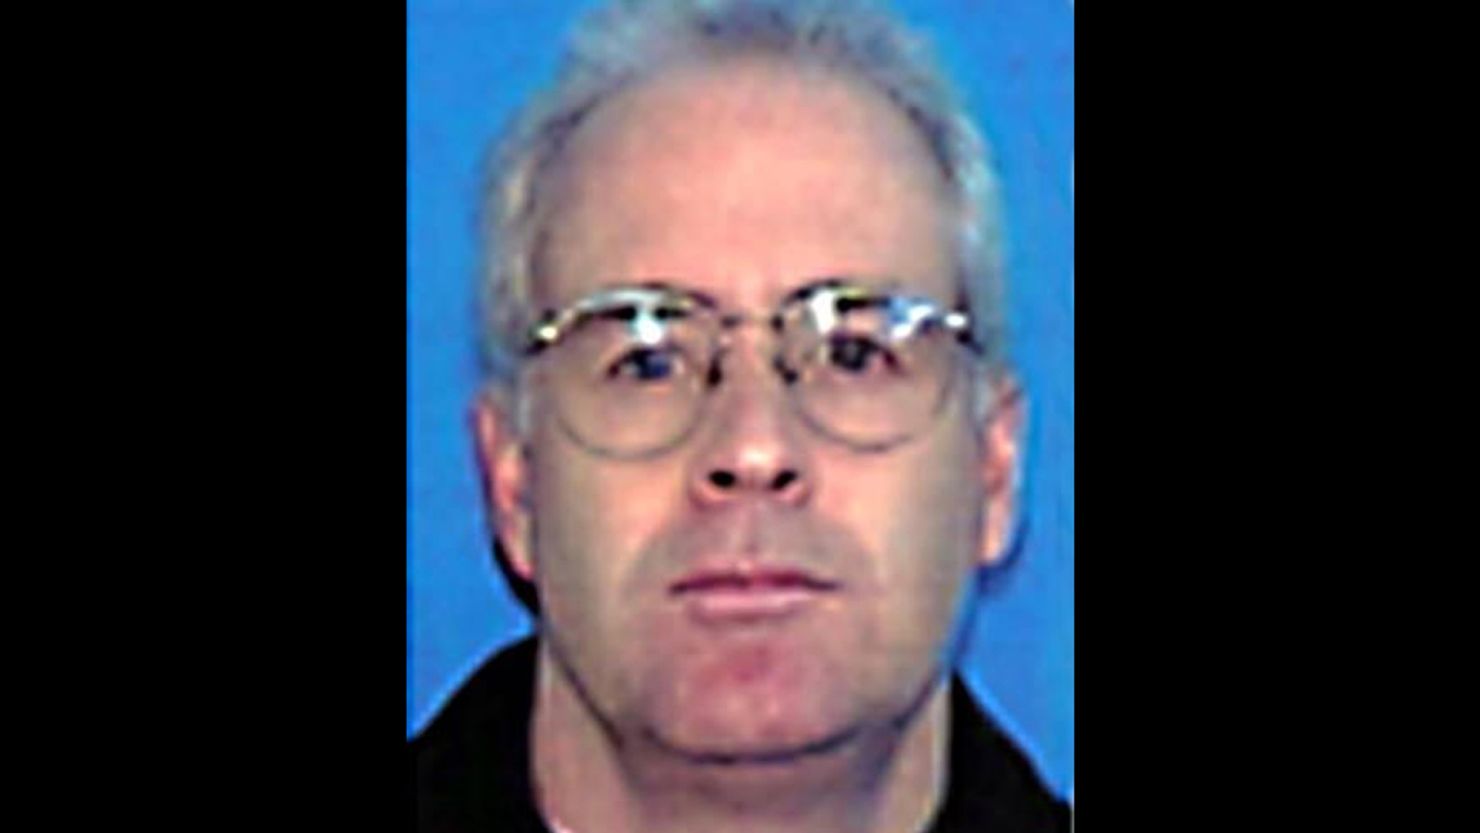 Scott Kelley, shown here in a wanted poster, was arrested on a charge of noncustodial kidnapping.